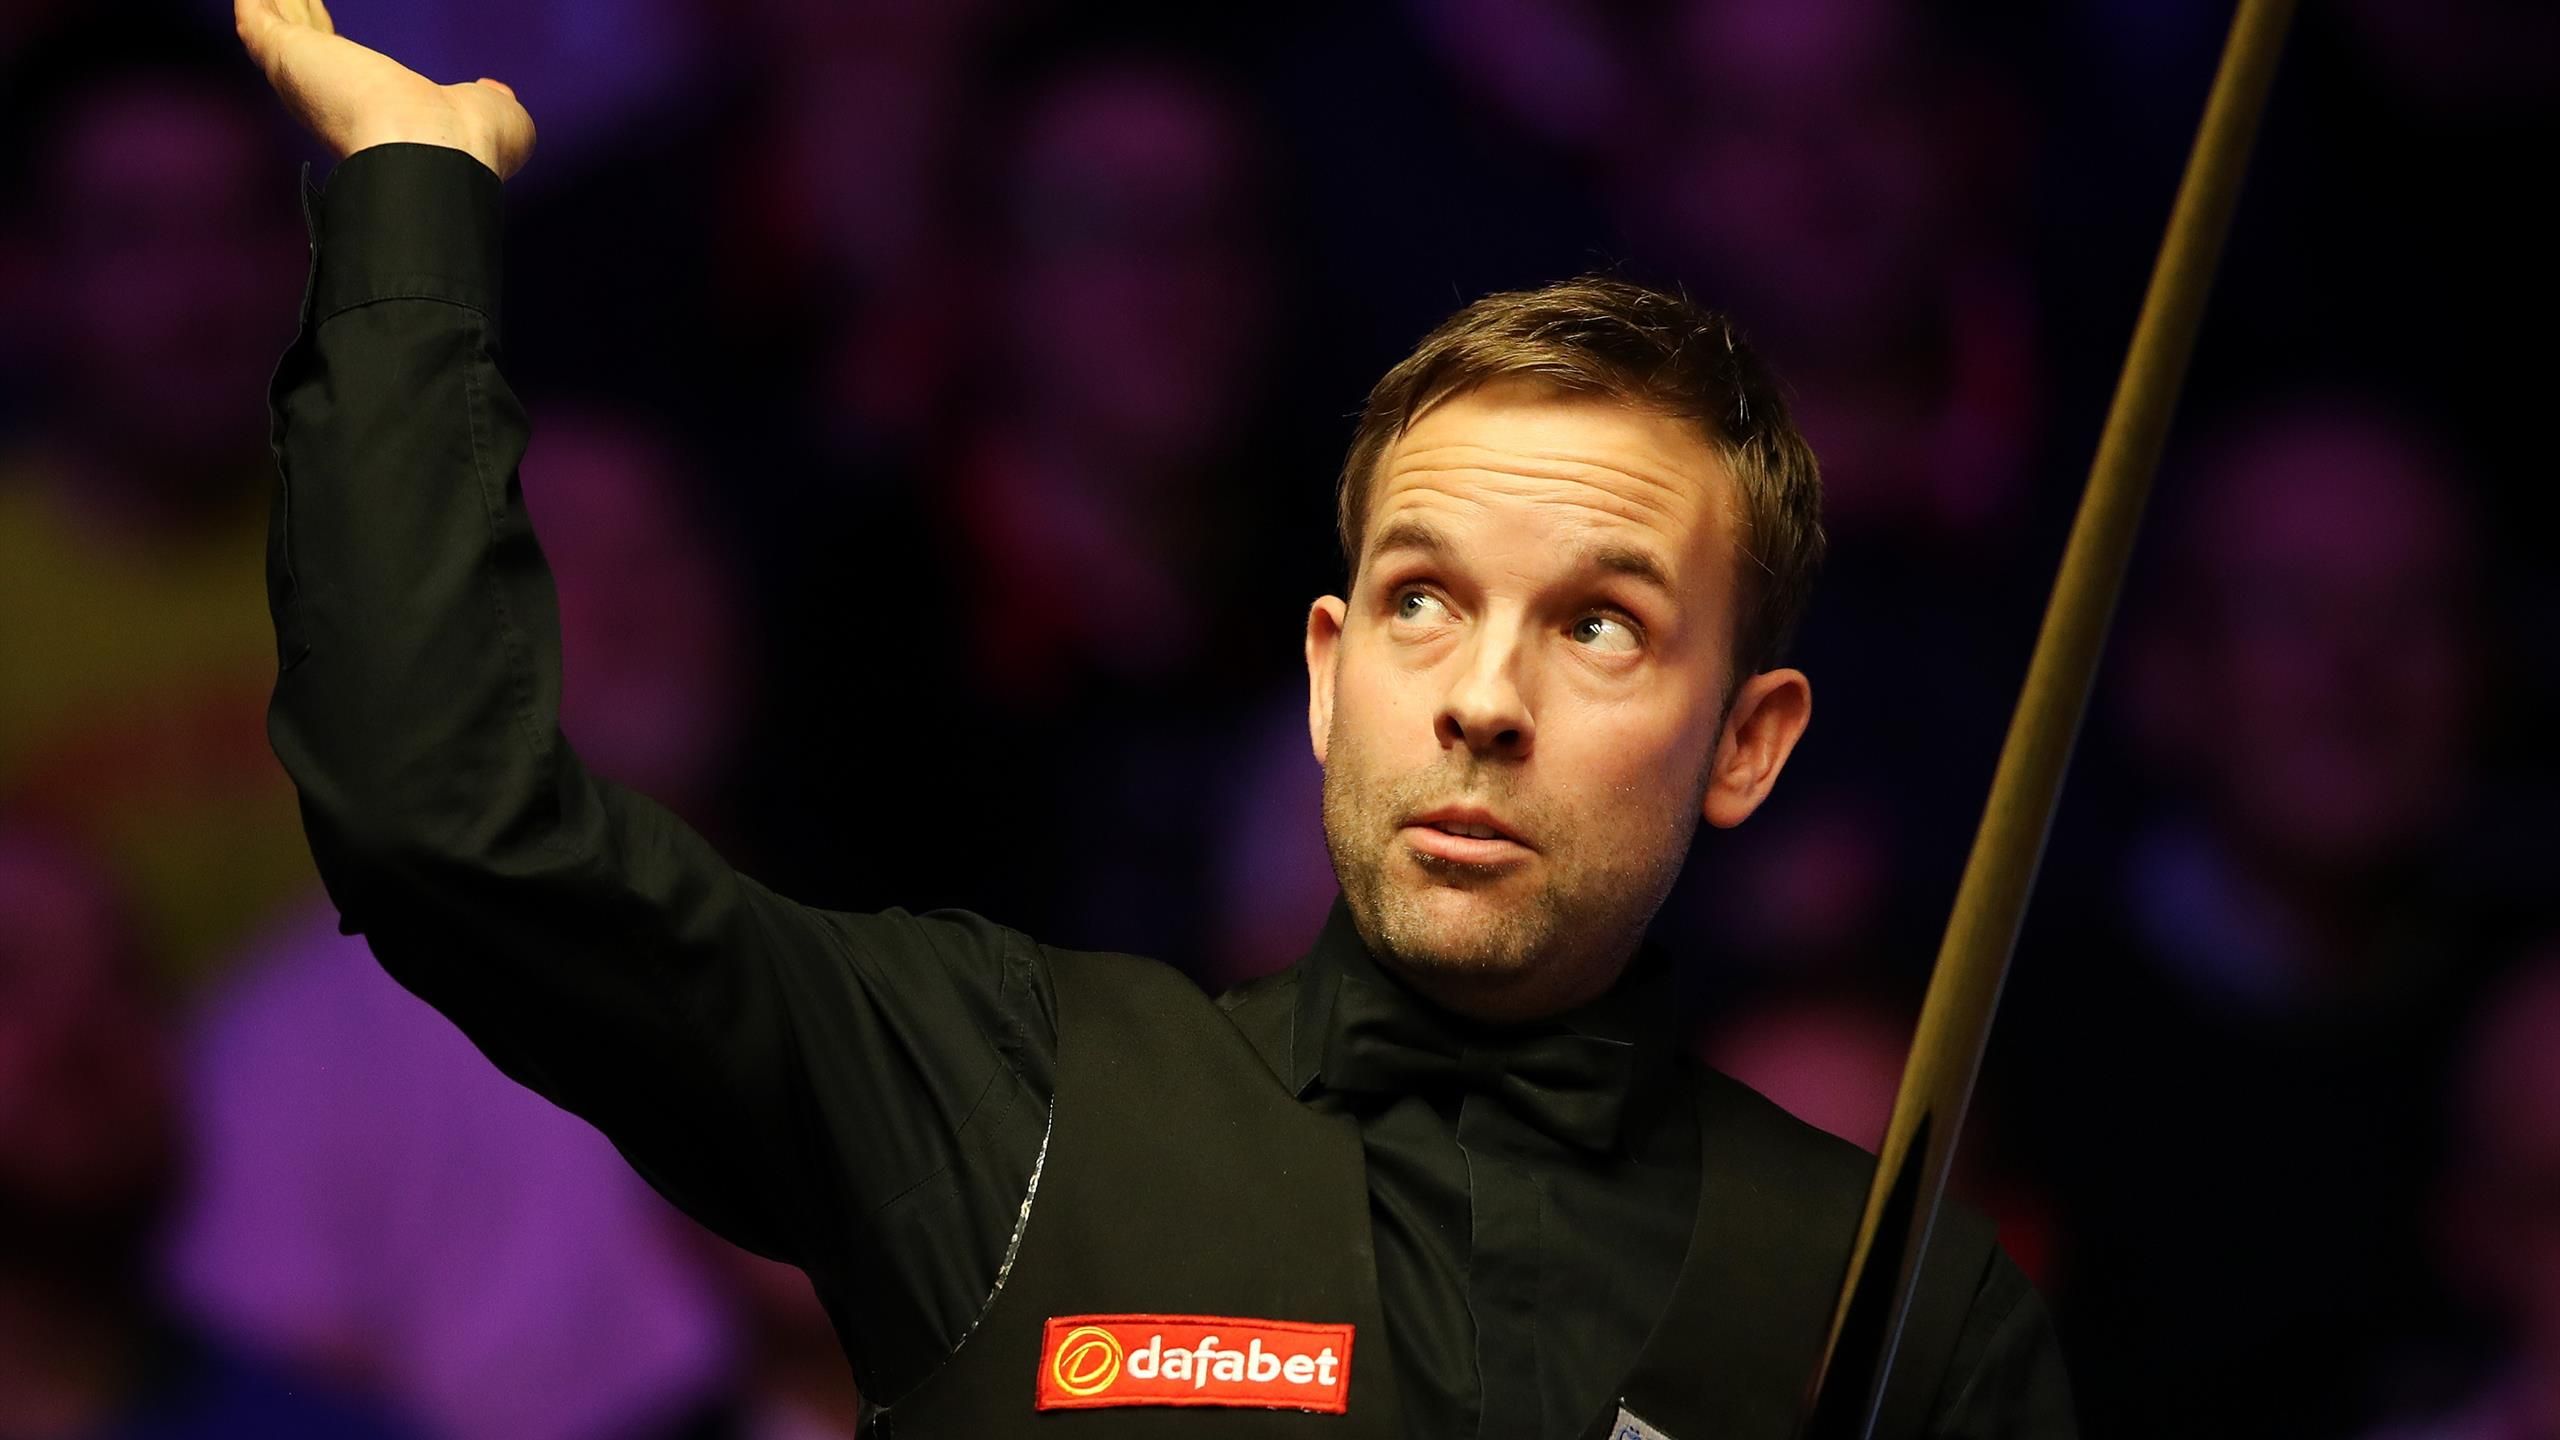 World Snooker Championship qualifiers - Latest results, scores, schedule and order of play ahead of Crucible